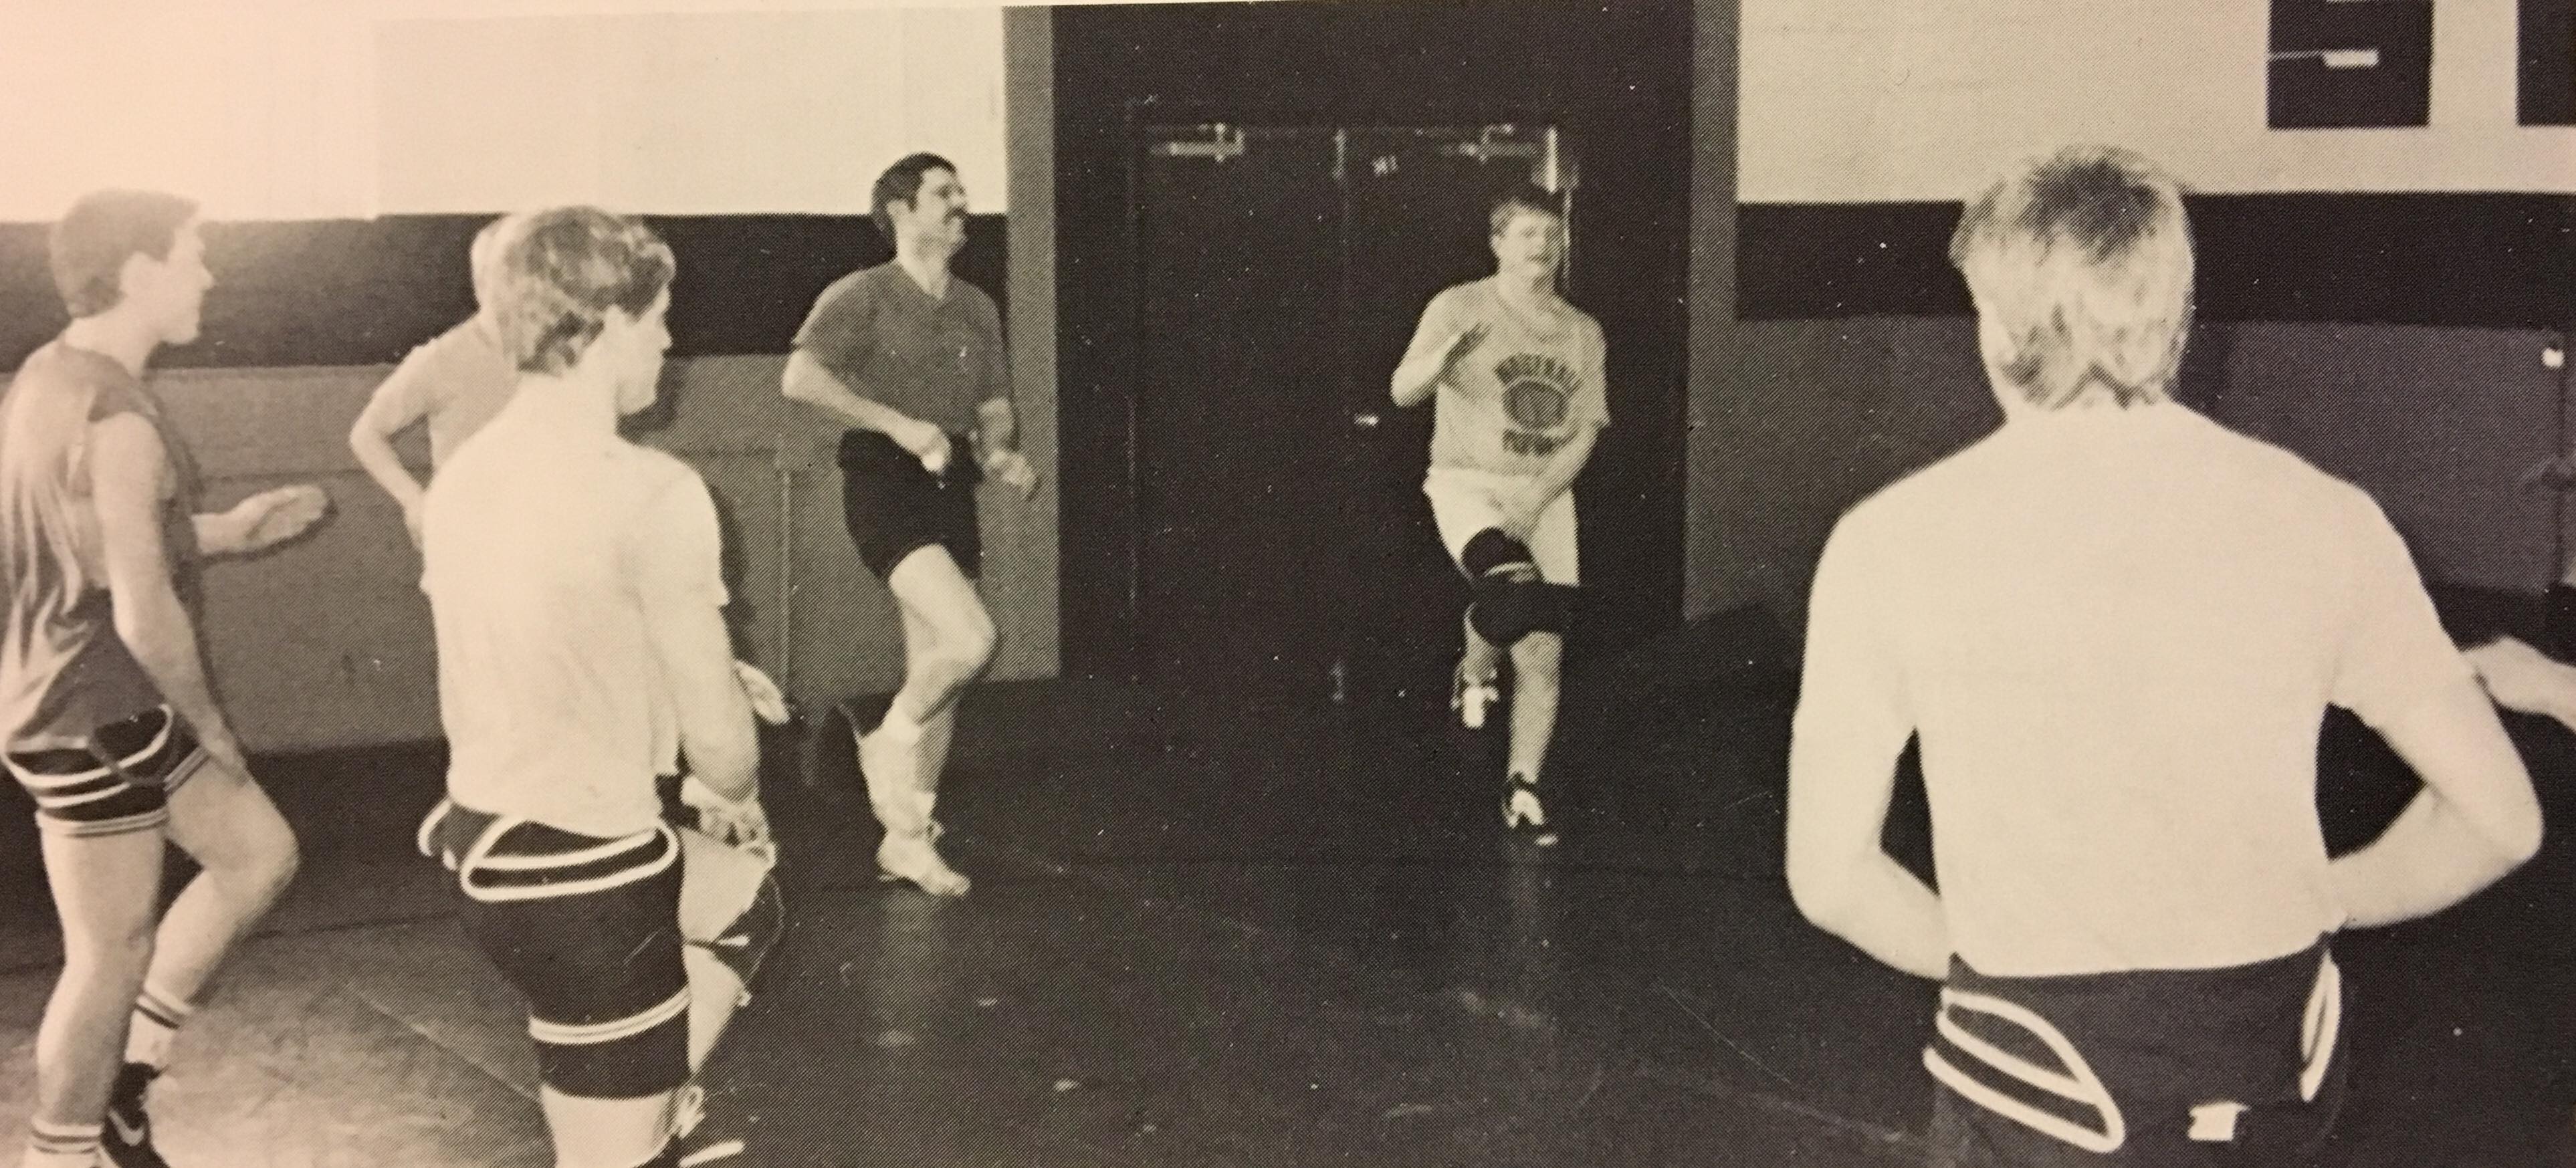 Jim Powell, Jerry Leque, Coach Hauser, Craig Thompson, and Clark Kulig warm up for practice.